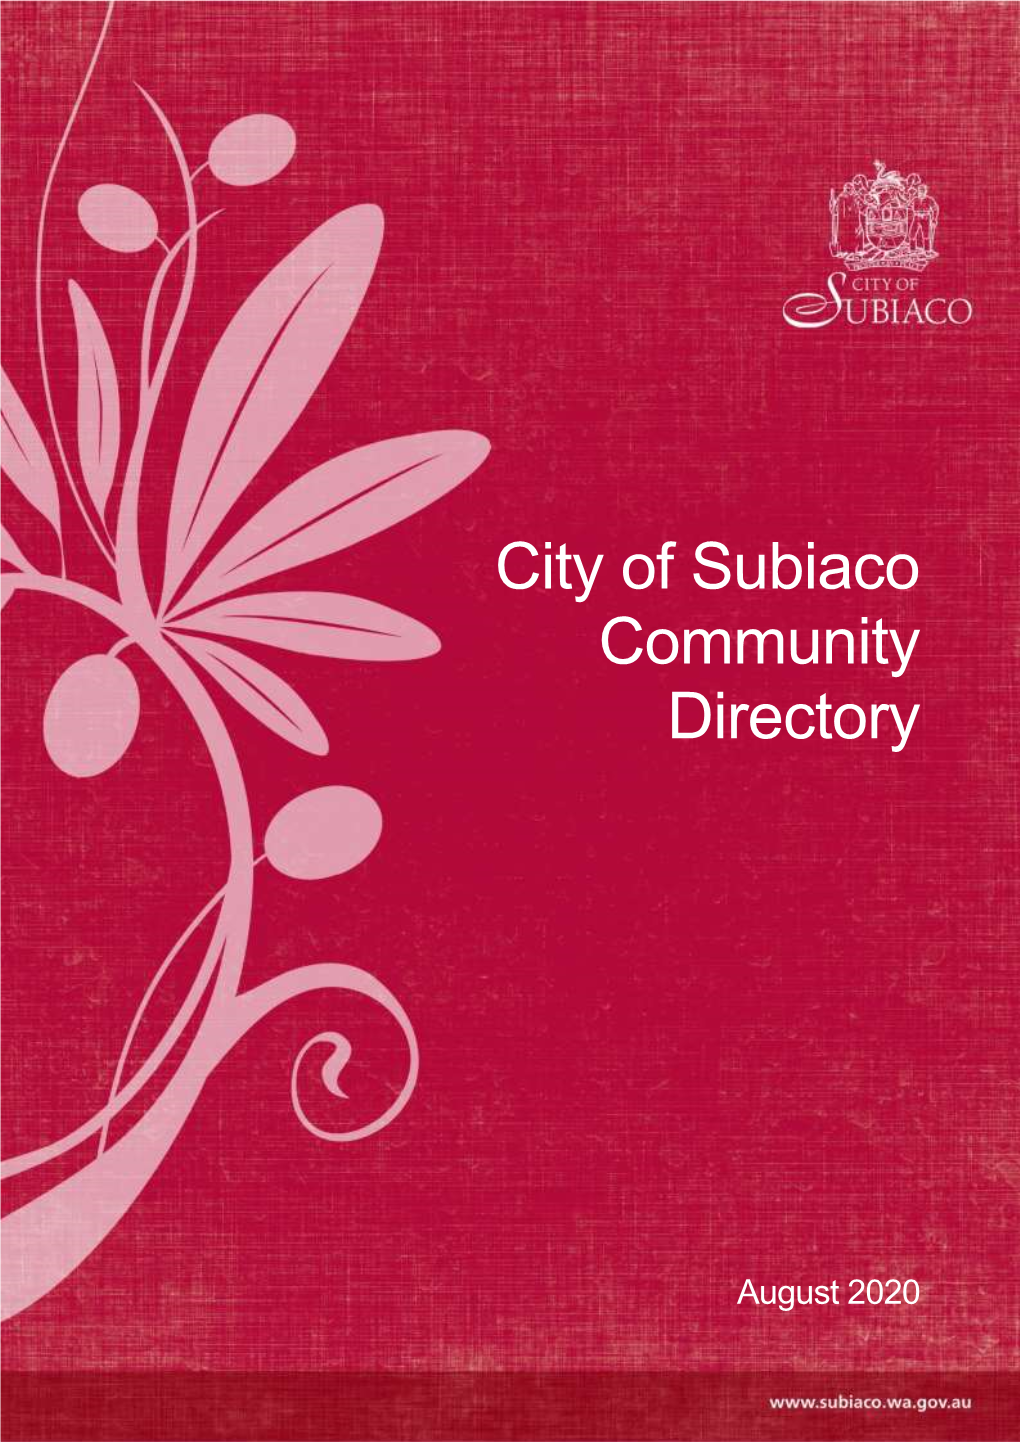 City of Subiaco Community Directory